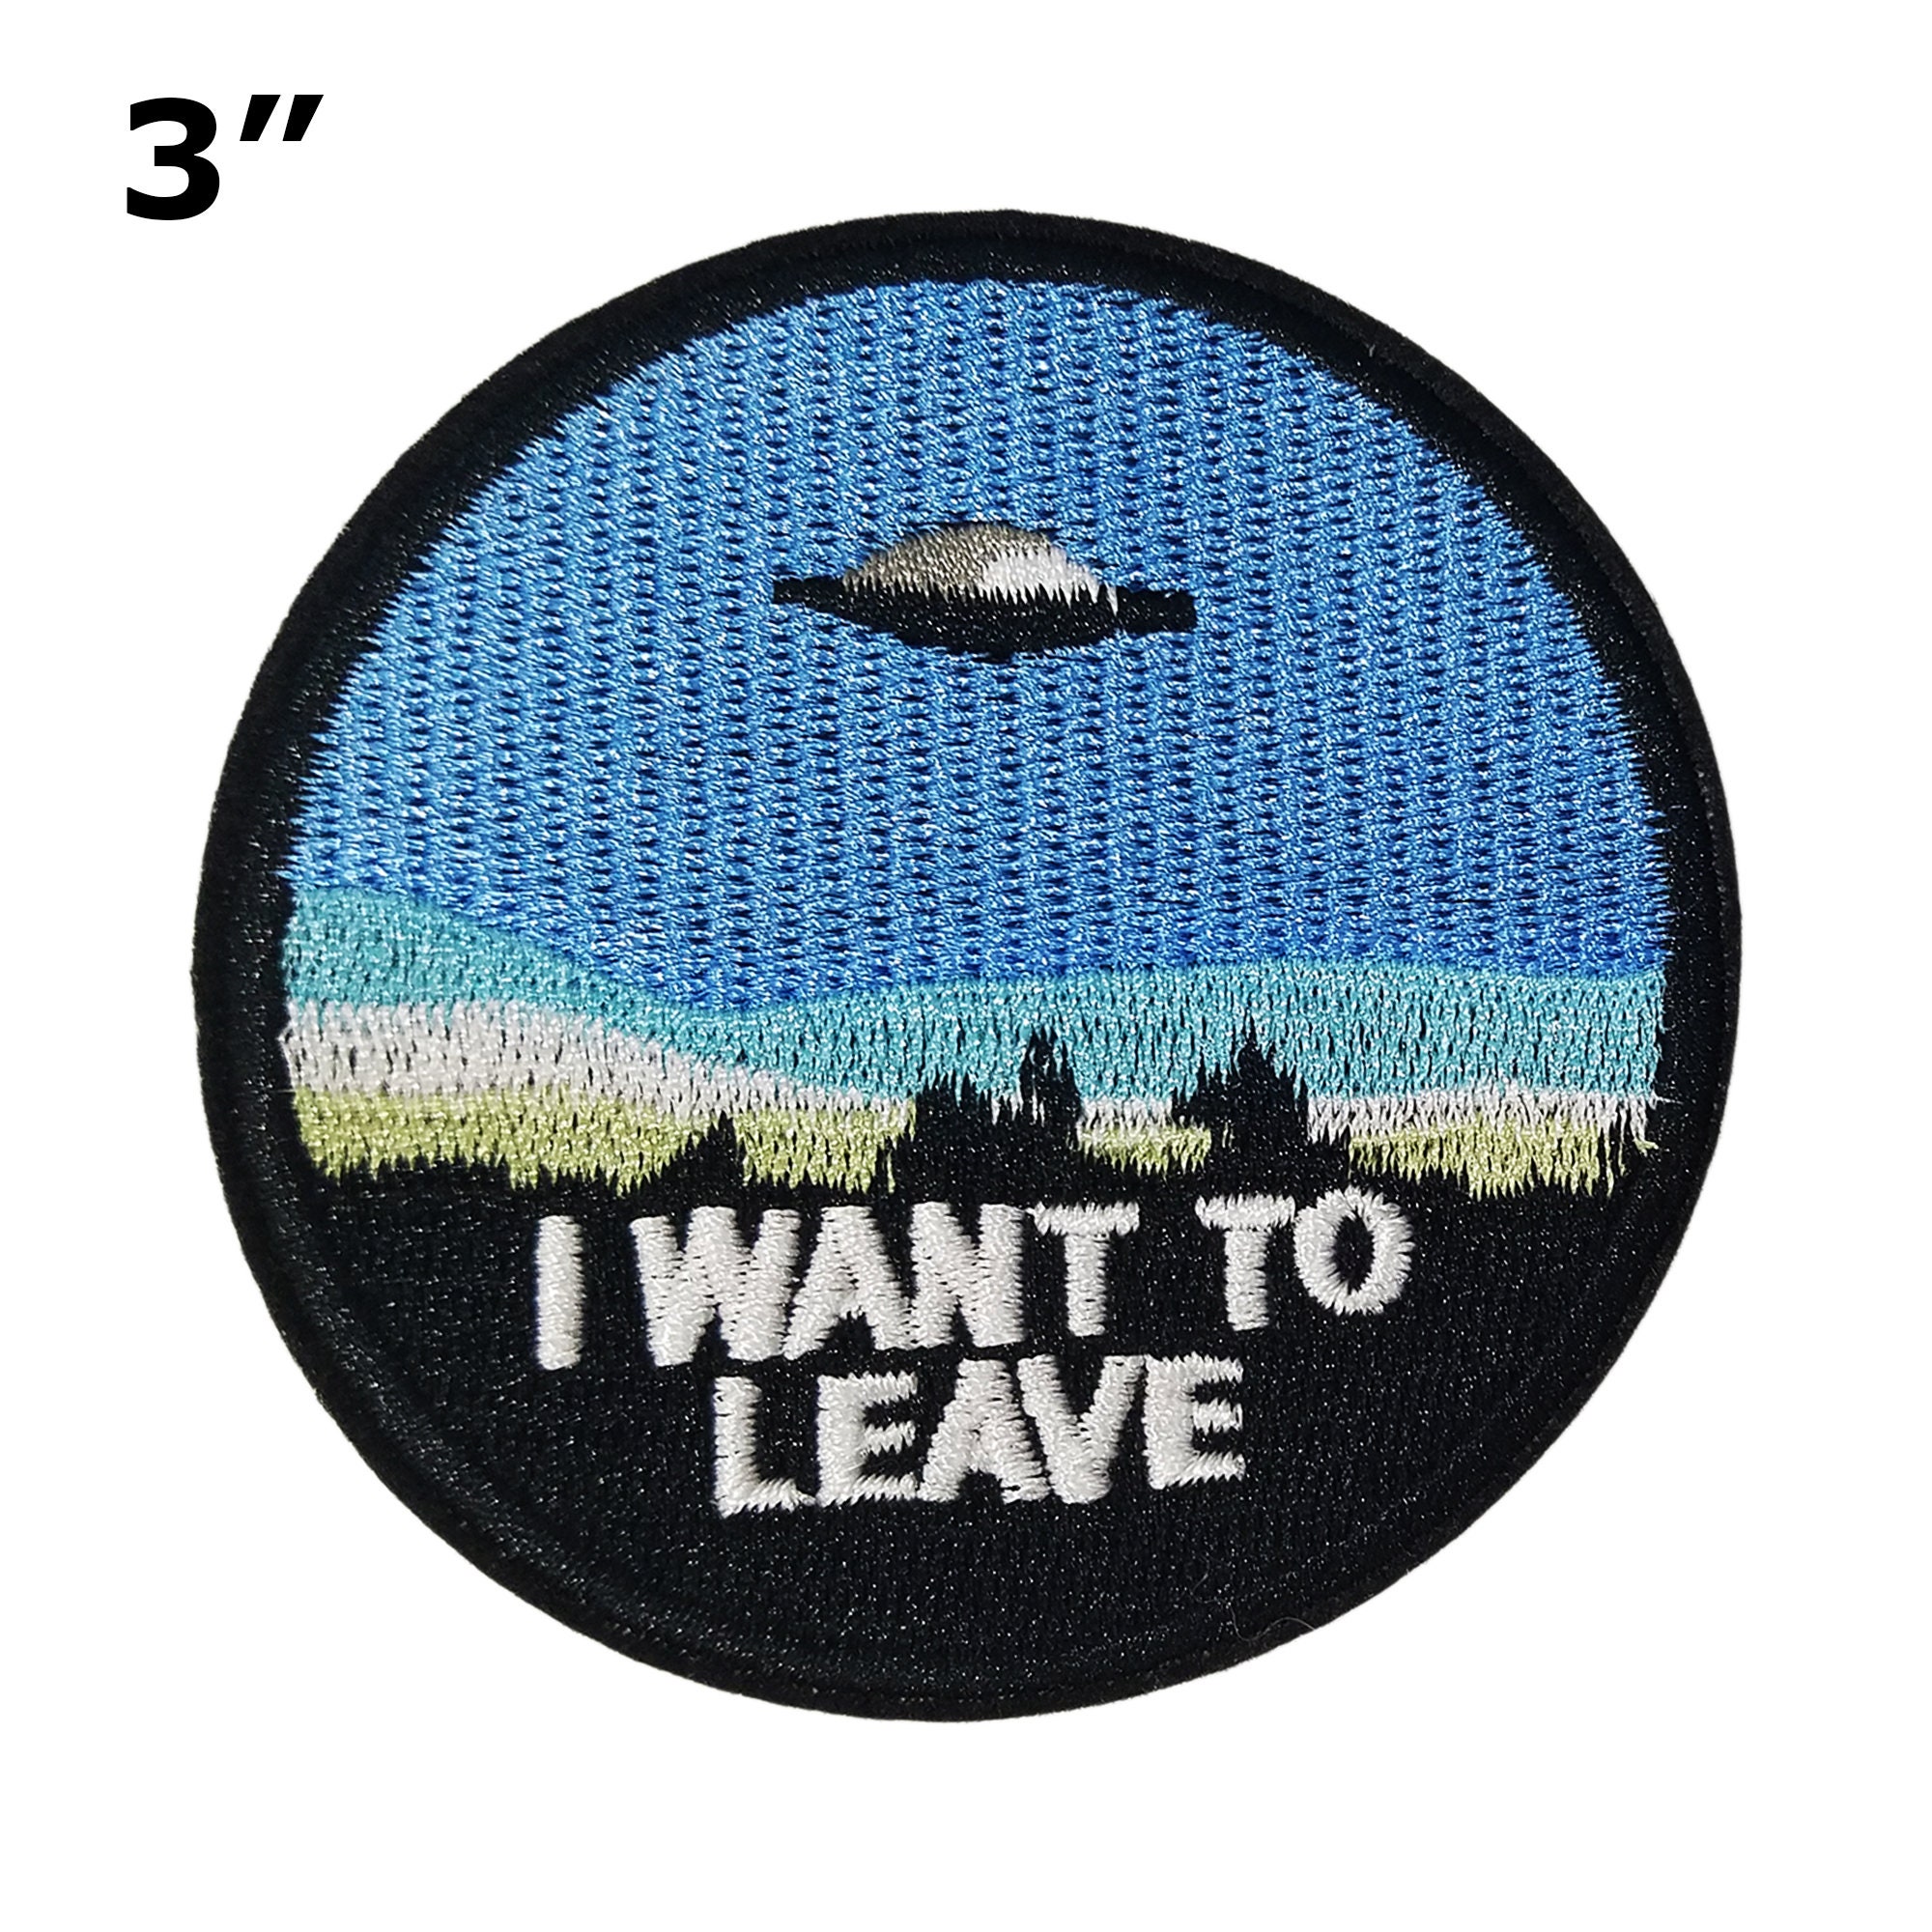 Patches for Jackets Patches Flower Patches Jackets Punk Patches Sea Style Patch Custom Patches Iron on Patches DnD Patches